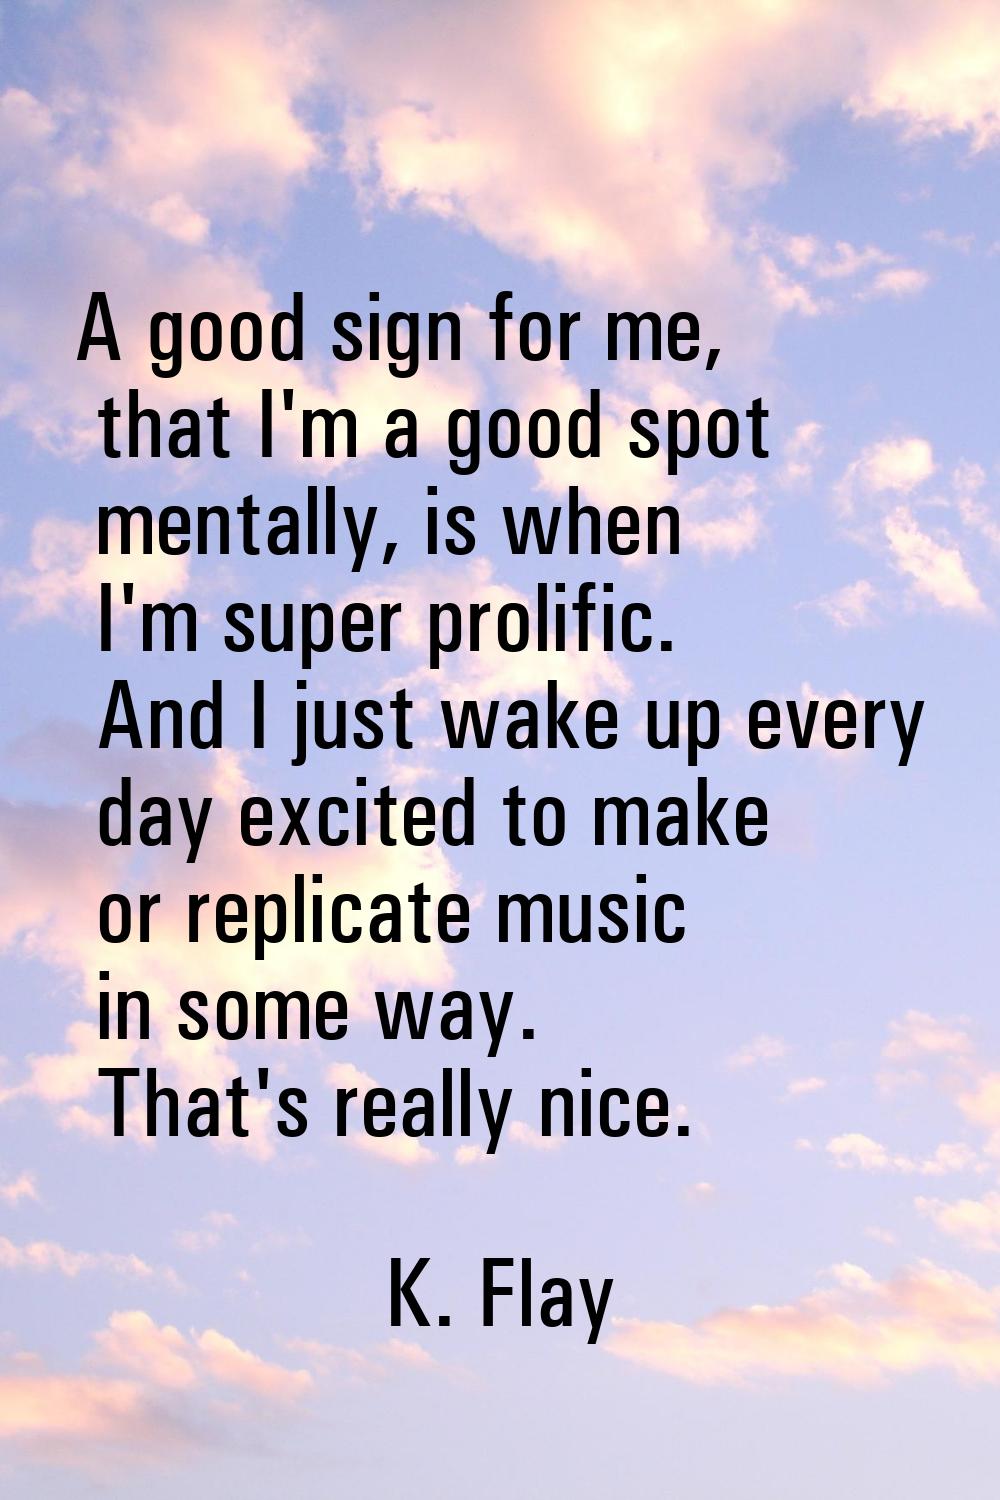 A good sign for me, that I'm a good spot mentally, is when I'm super prolific. And I just wake up e